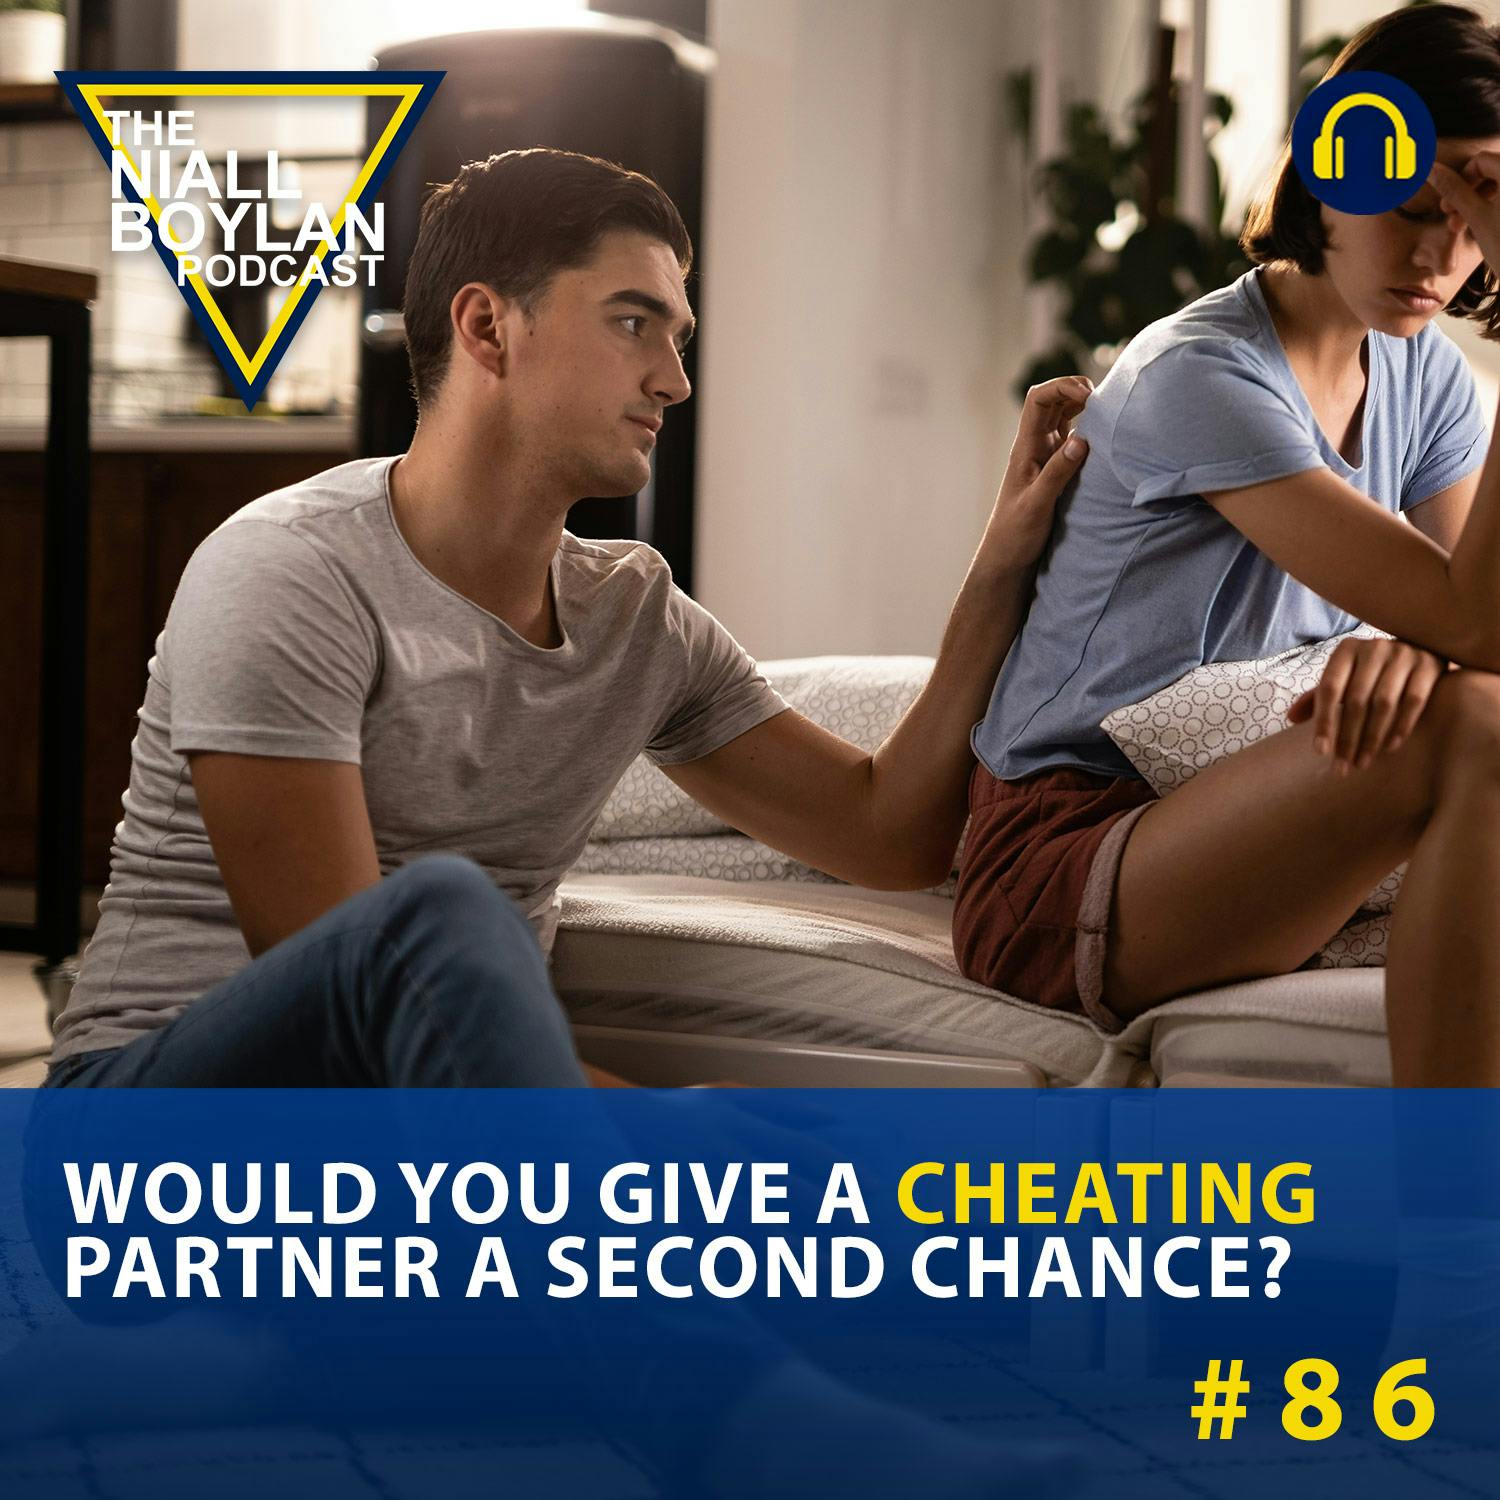 #86 Would You Give A Cheating Partner A Second Chance?